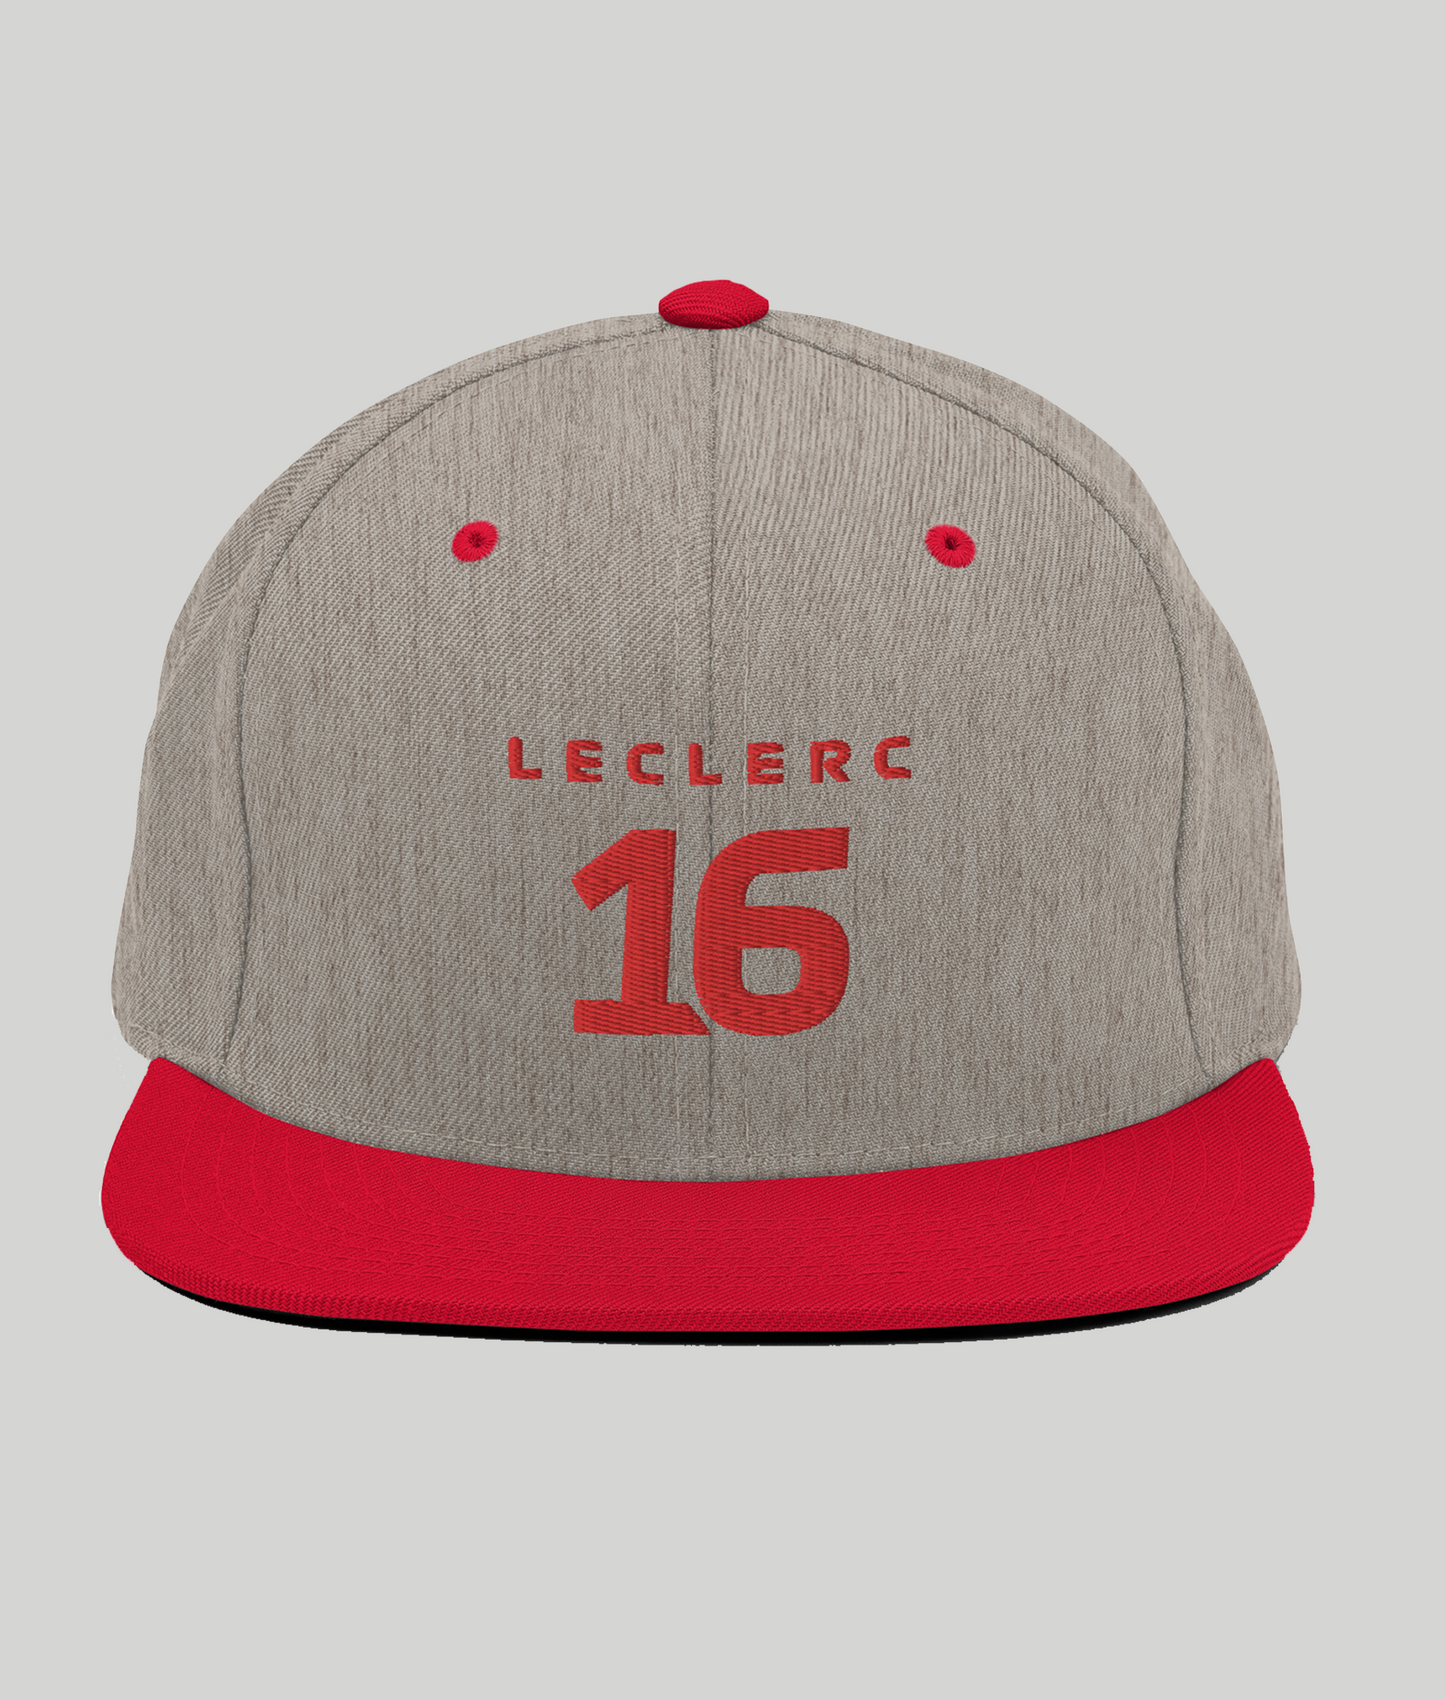 charles leclerc snapback hat red and grey